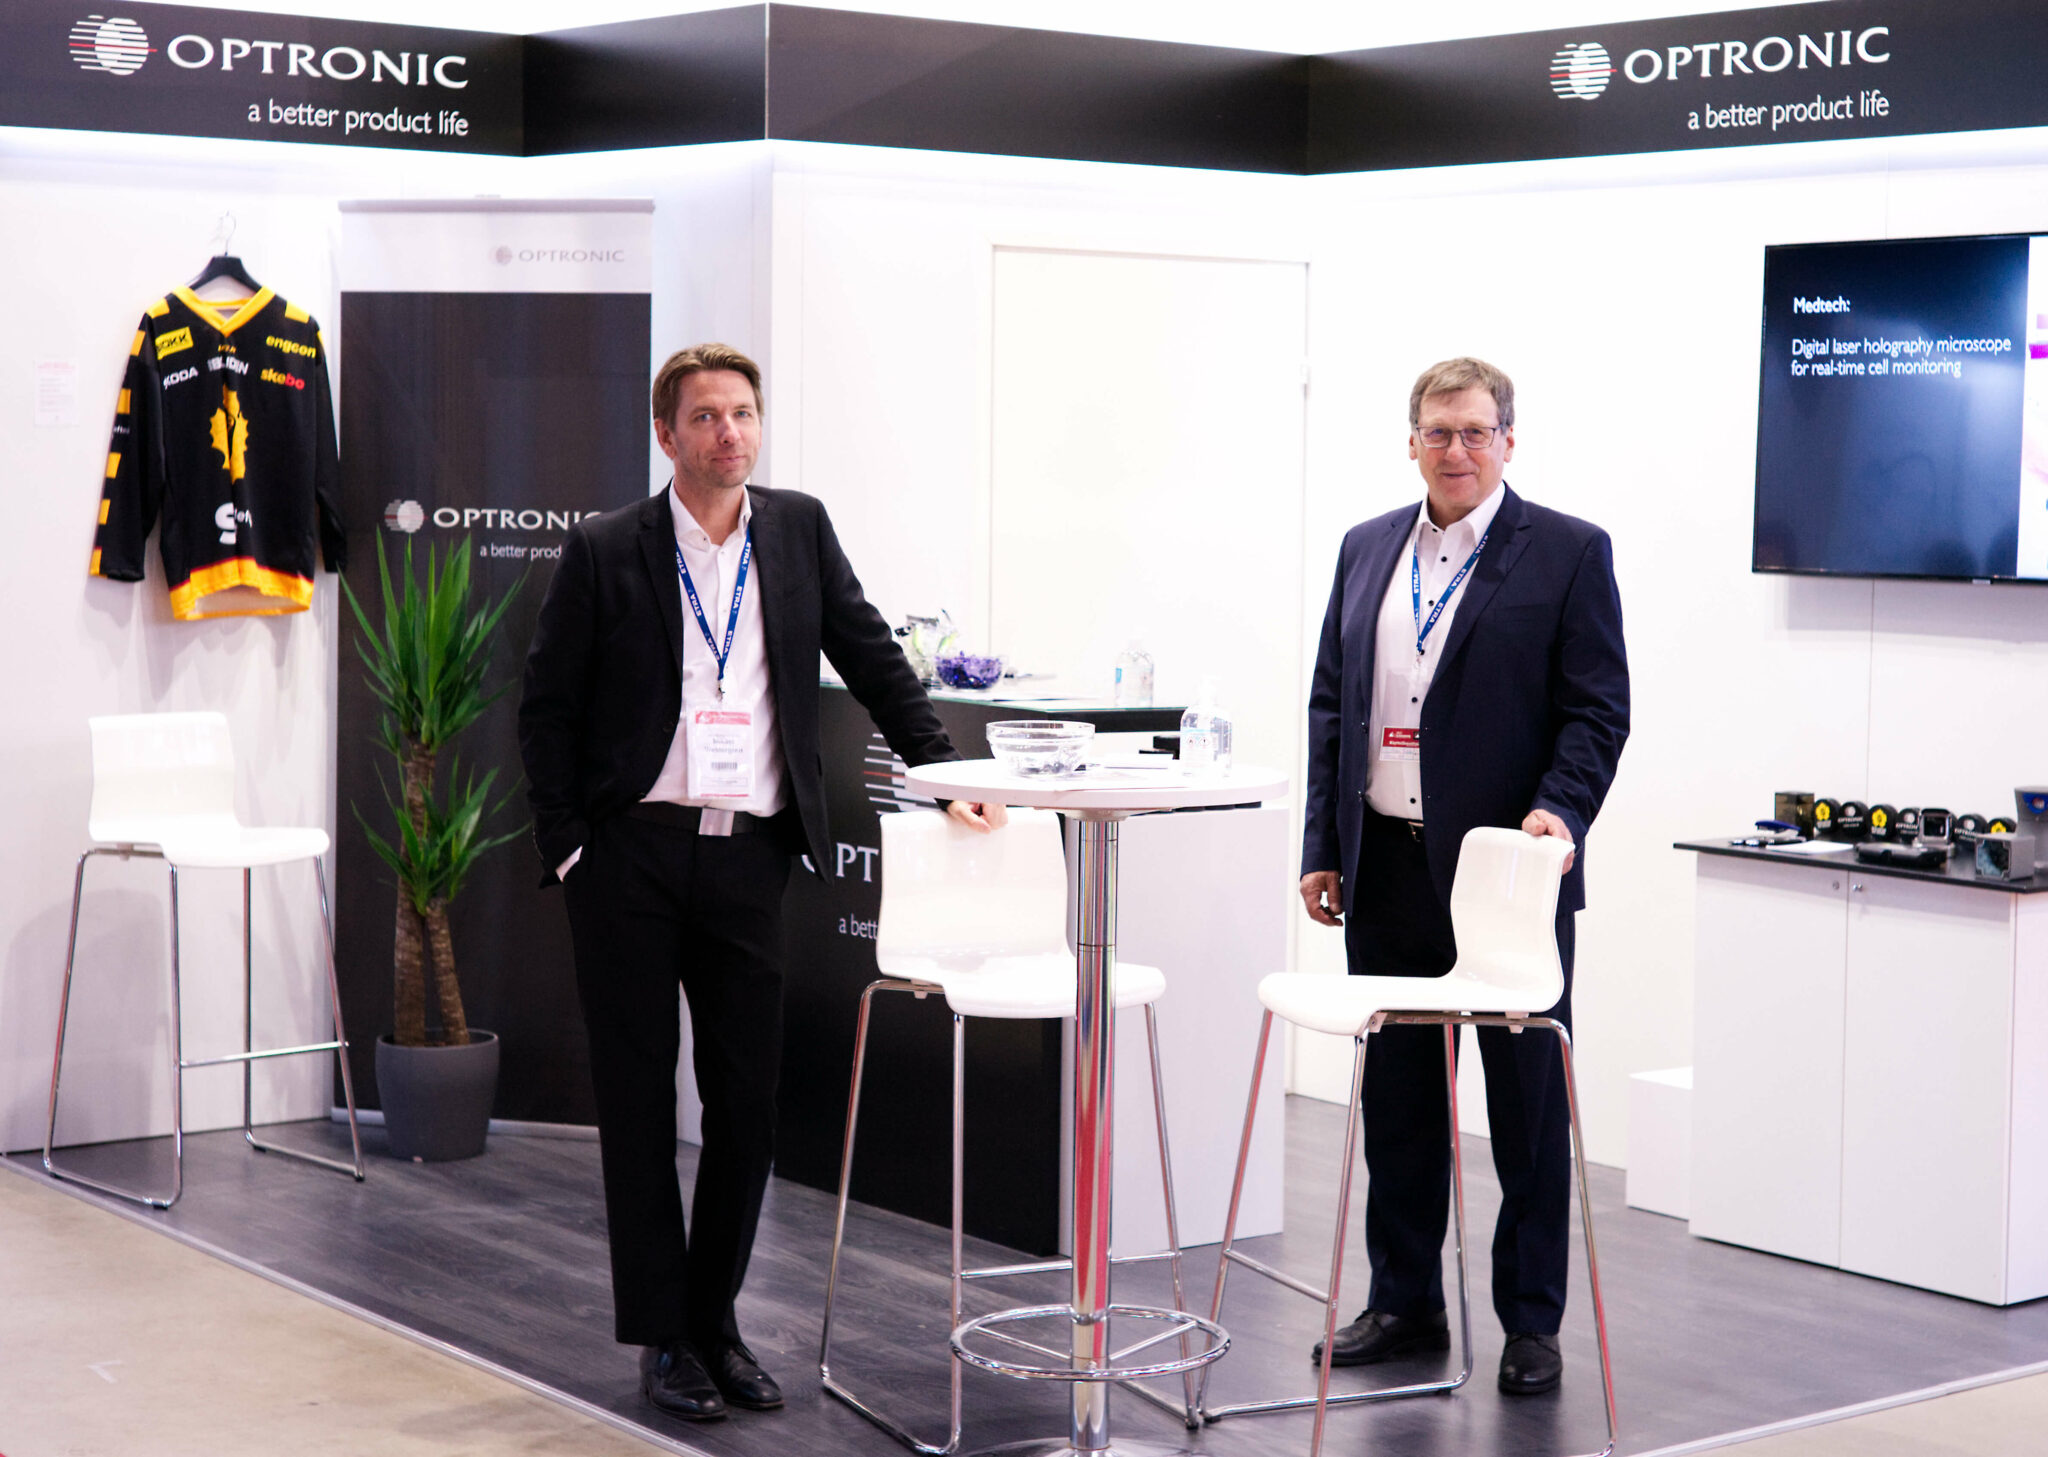 Optronic on the rise in Finland